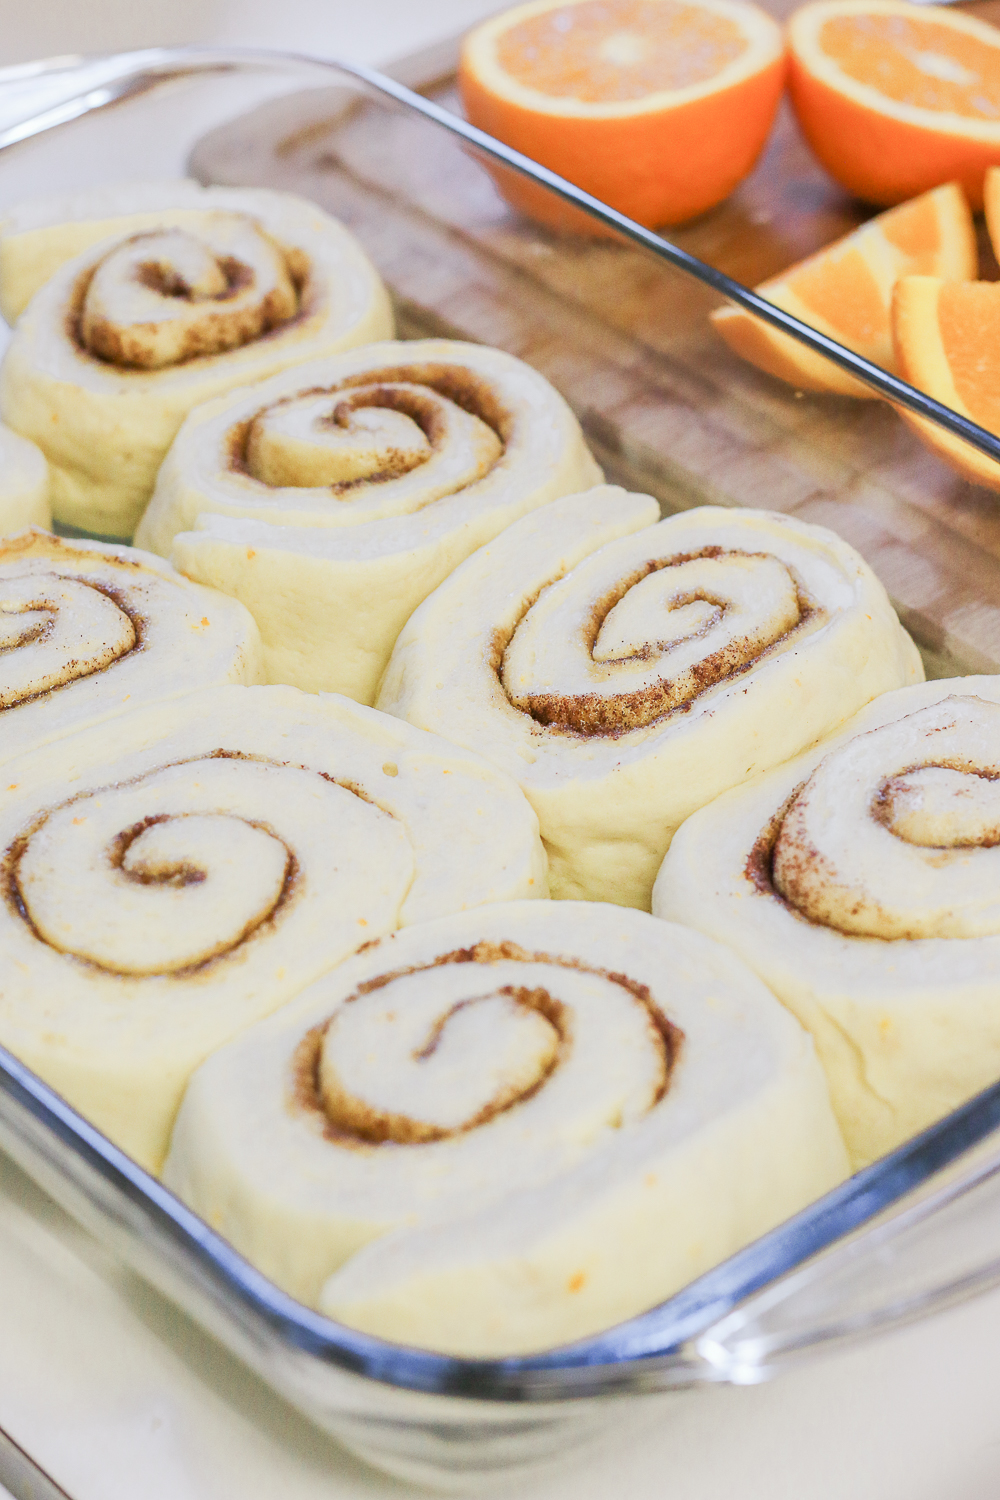 Sweetest Holiday Tradition: Homemade Orange Rolls Recipe by southern lifestyle blogger Stephanie Ziajka from Diary of a Debutante, omeprazole orally disintegrating tablet, big fluffy homemade cinnamon rolls recipe, homemade cinnamon rolls from scratch, homemade jumbo cinnamon rolls